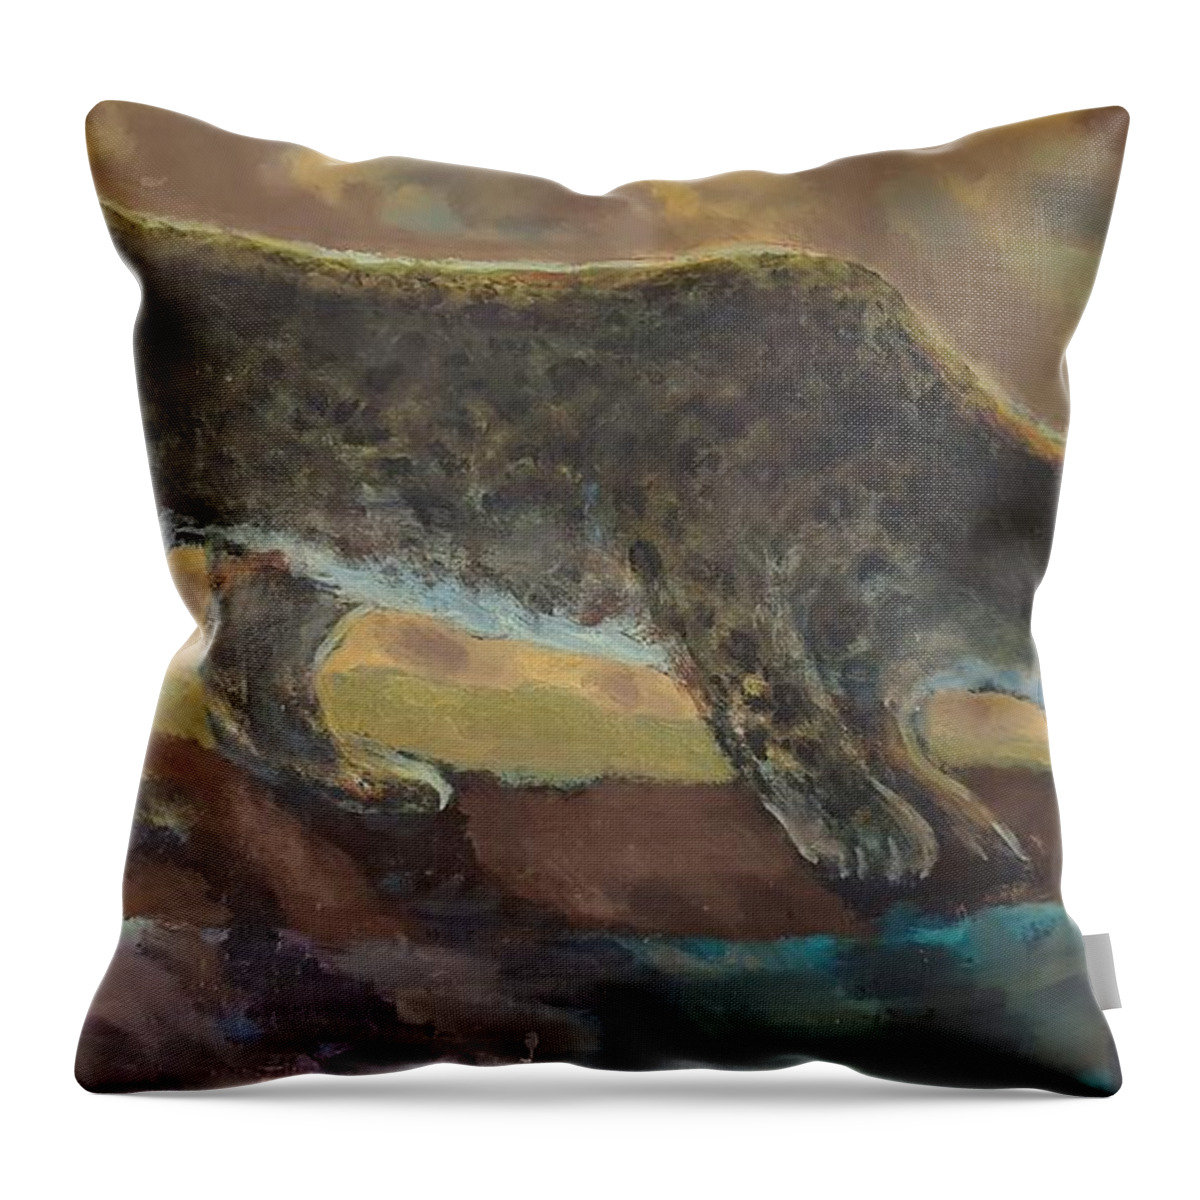 Leopard Throw Pillow featuring the painting The Leopard by Enrico Garff